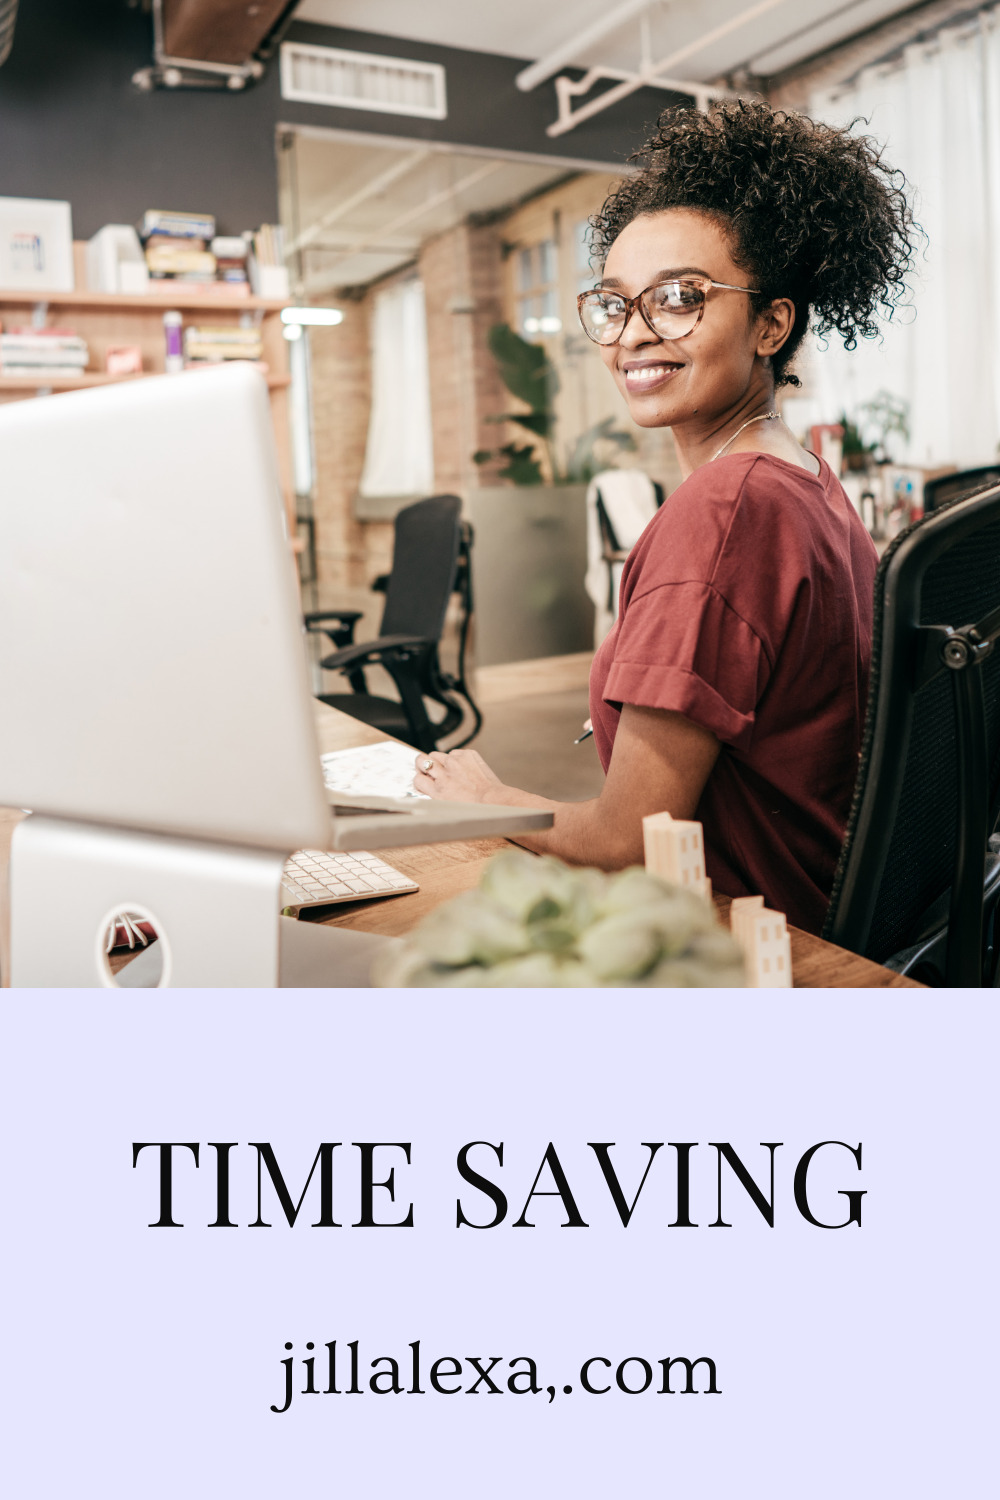 Time-saving is essential to whatever business you are in, but managing time wisely is still a problem.